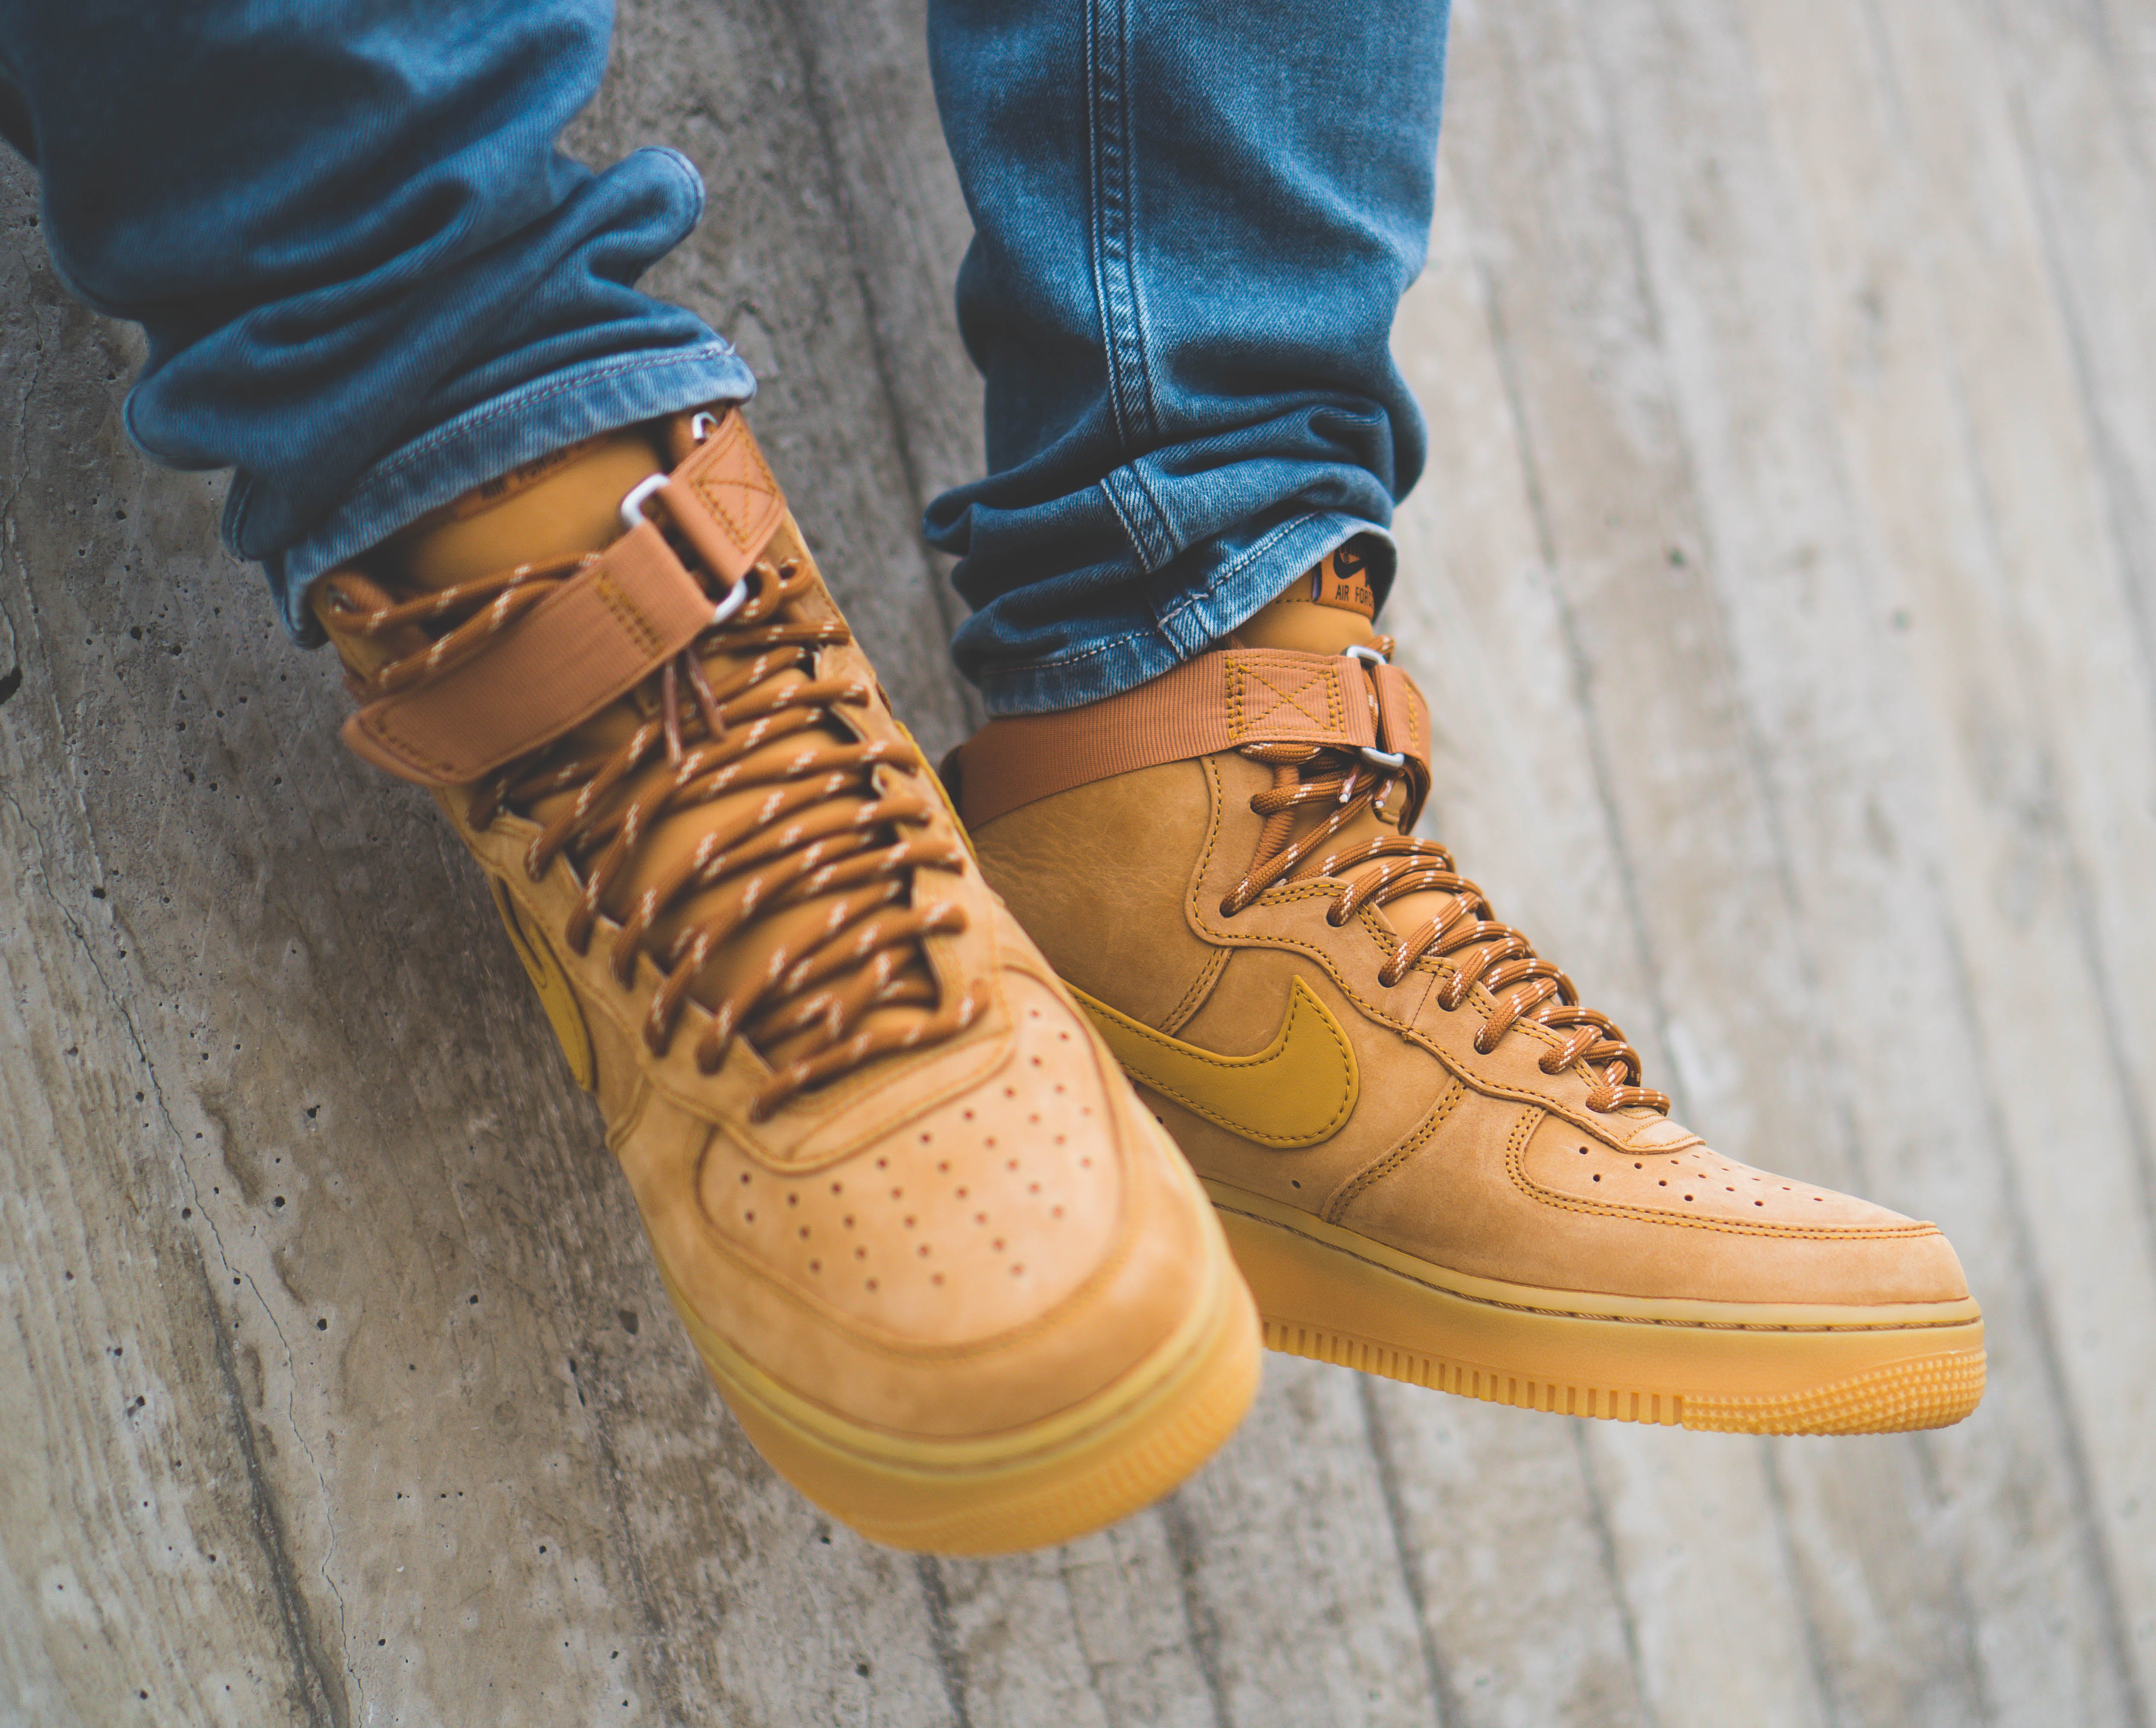 Nike Air Force 1 High Flax: The Must-Have Sneaker For The Fall Season